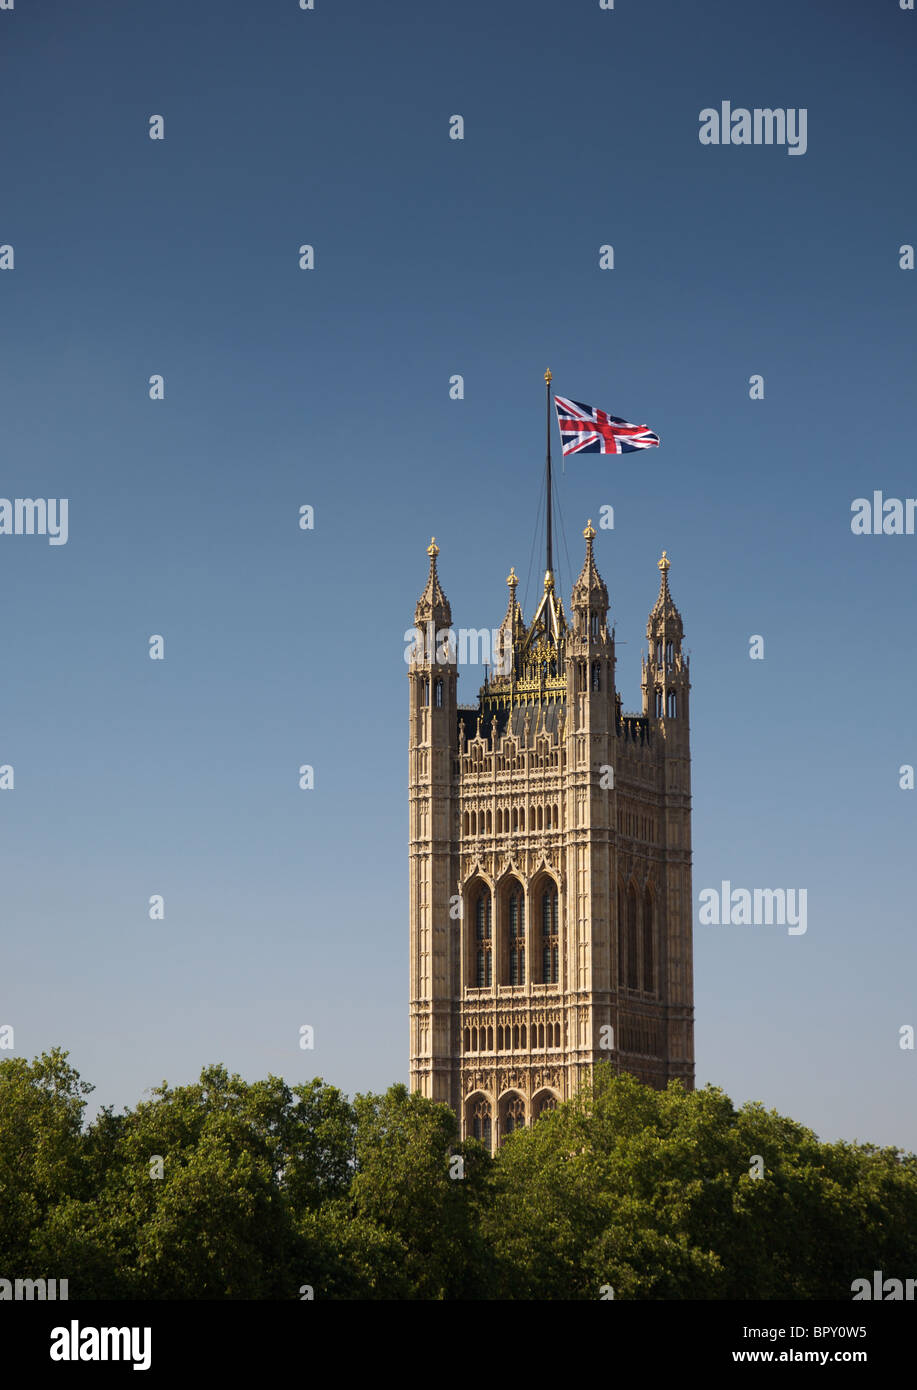 Victoria Tower, Houses of Parliament, London Stock Photo